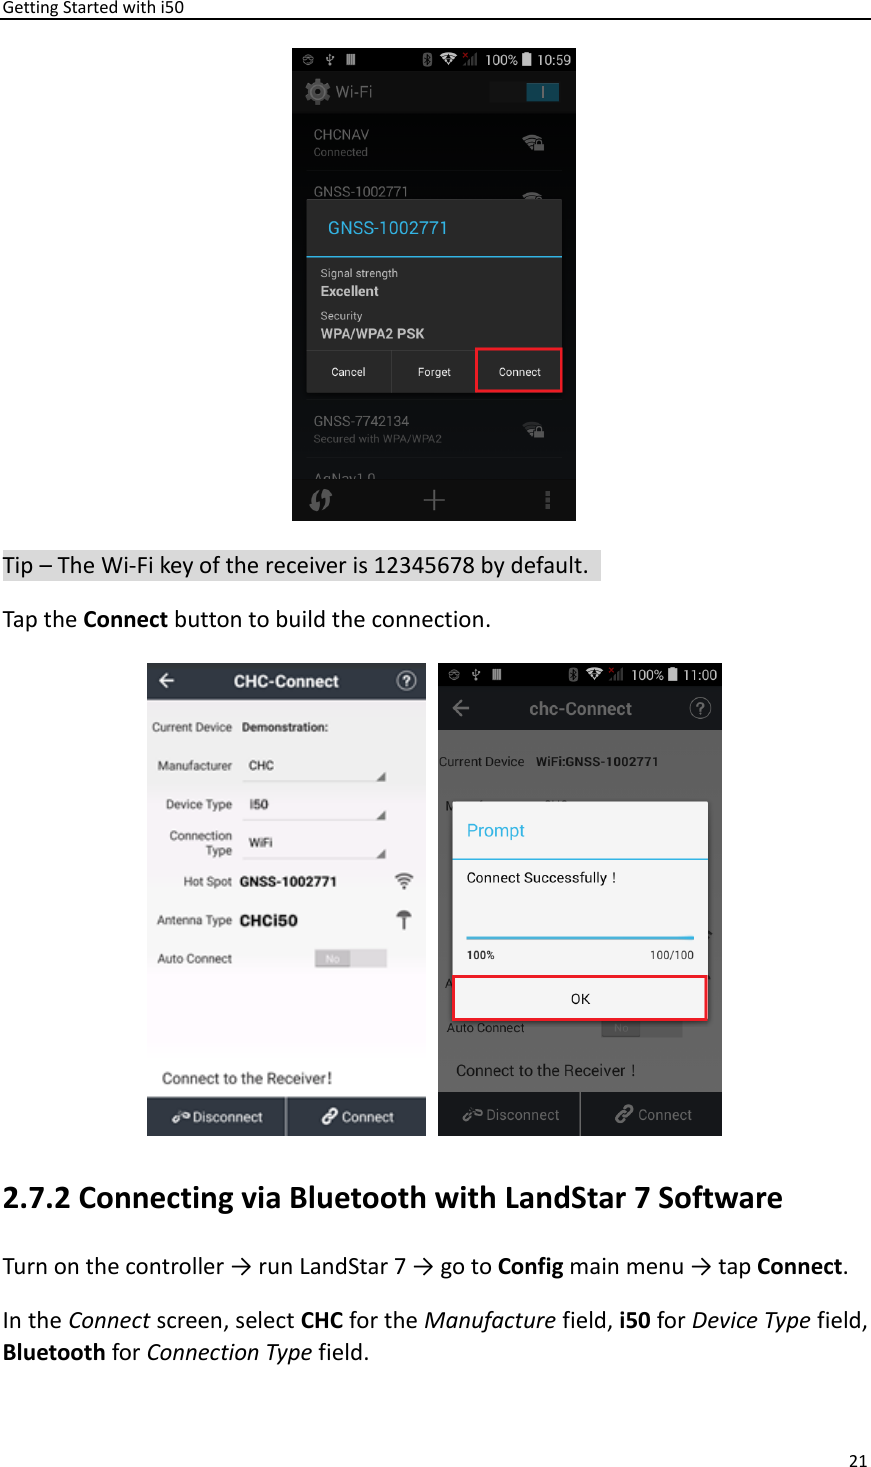 Getting Started with i50 21   Tip – The Wi-Fi key of the receiver is 12345678 by default.   Tap the Connect button to build the connection.     2.7.2 Connecting via Bluetooth with LandStar 7 Software Turn on the controller → run LandStar 7 → go to Config main menu → tap Connect. In the Connect screen, select CHC for the Manufacture field, i50 for Device Type field, Bluetooth for Connection Type field. 